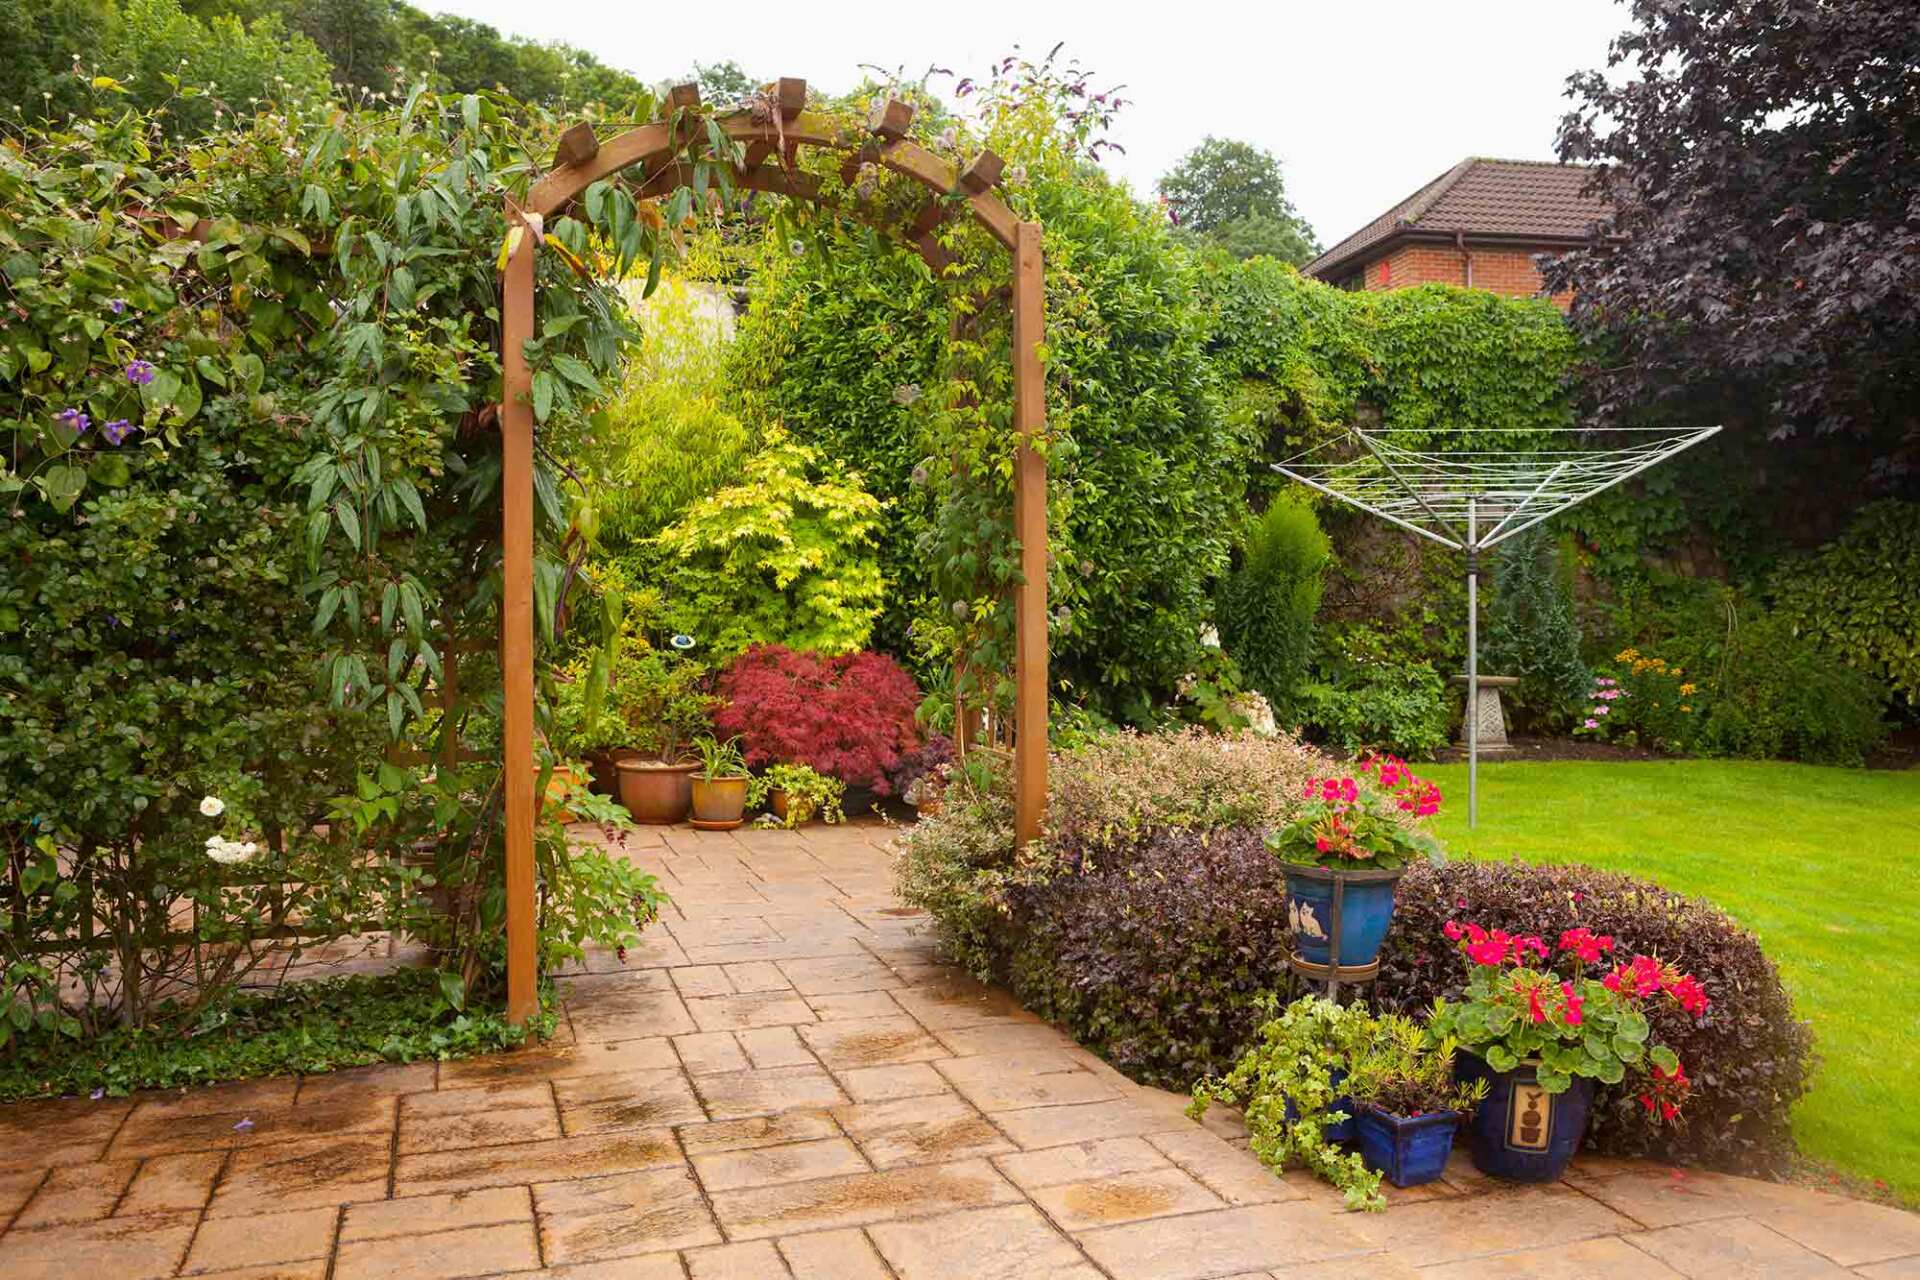 Decorative garden with elegant planting and paving